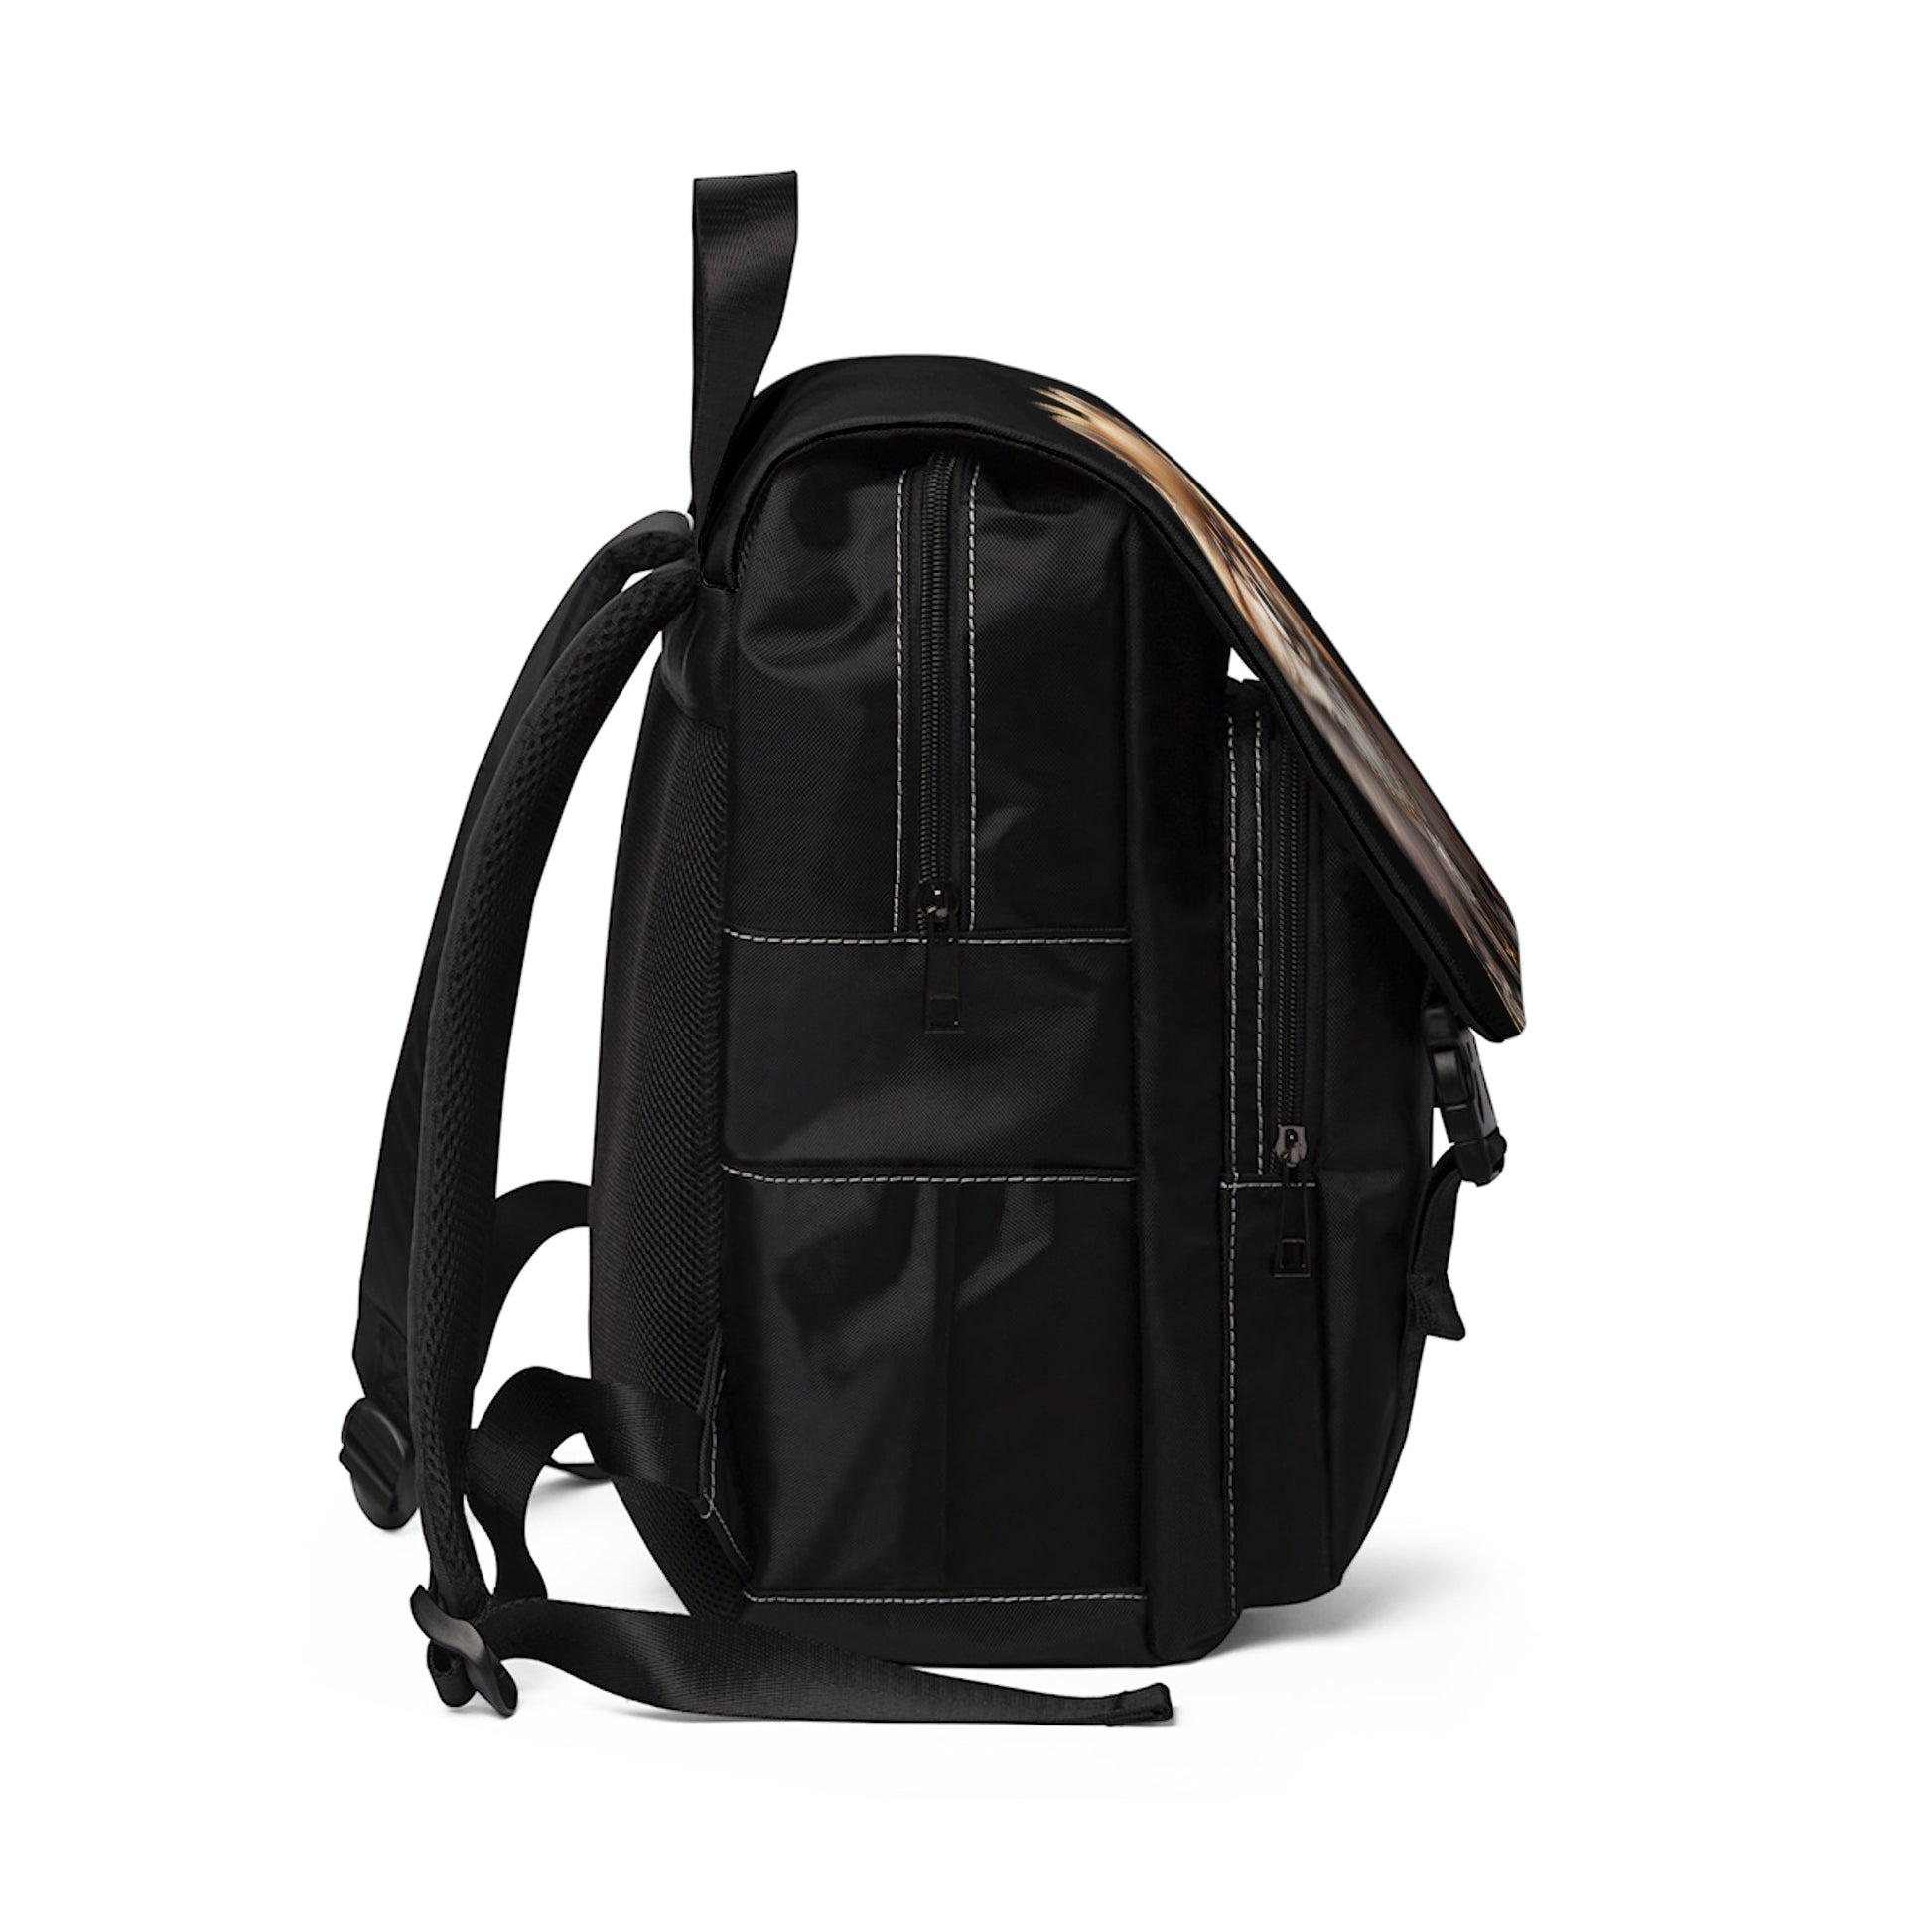 PHILLIP : Unisex Casual Shoulder Backpack - Shaggy Chic